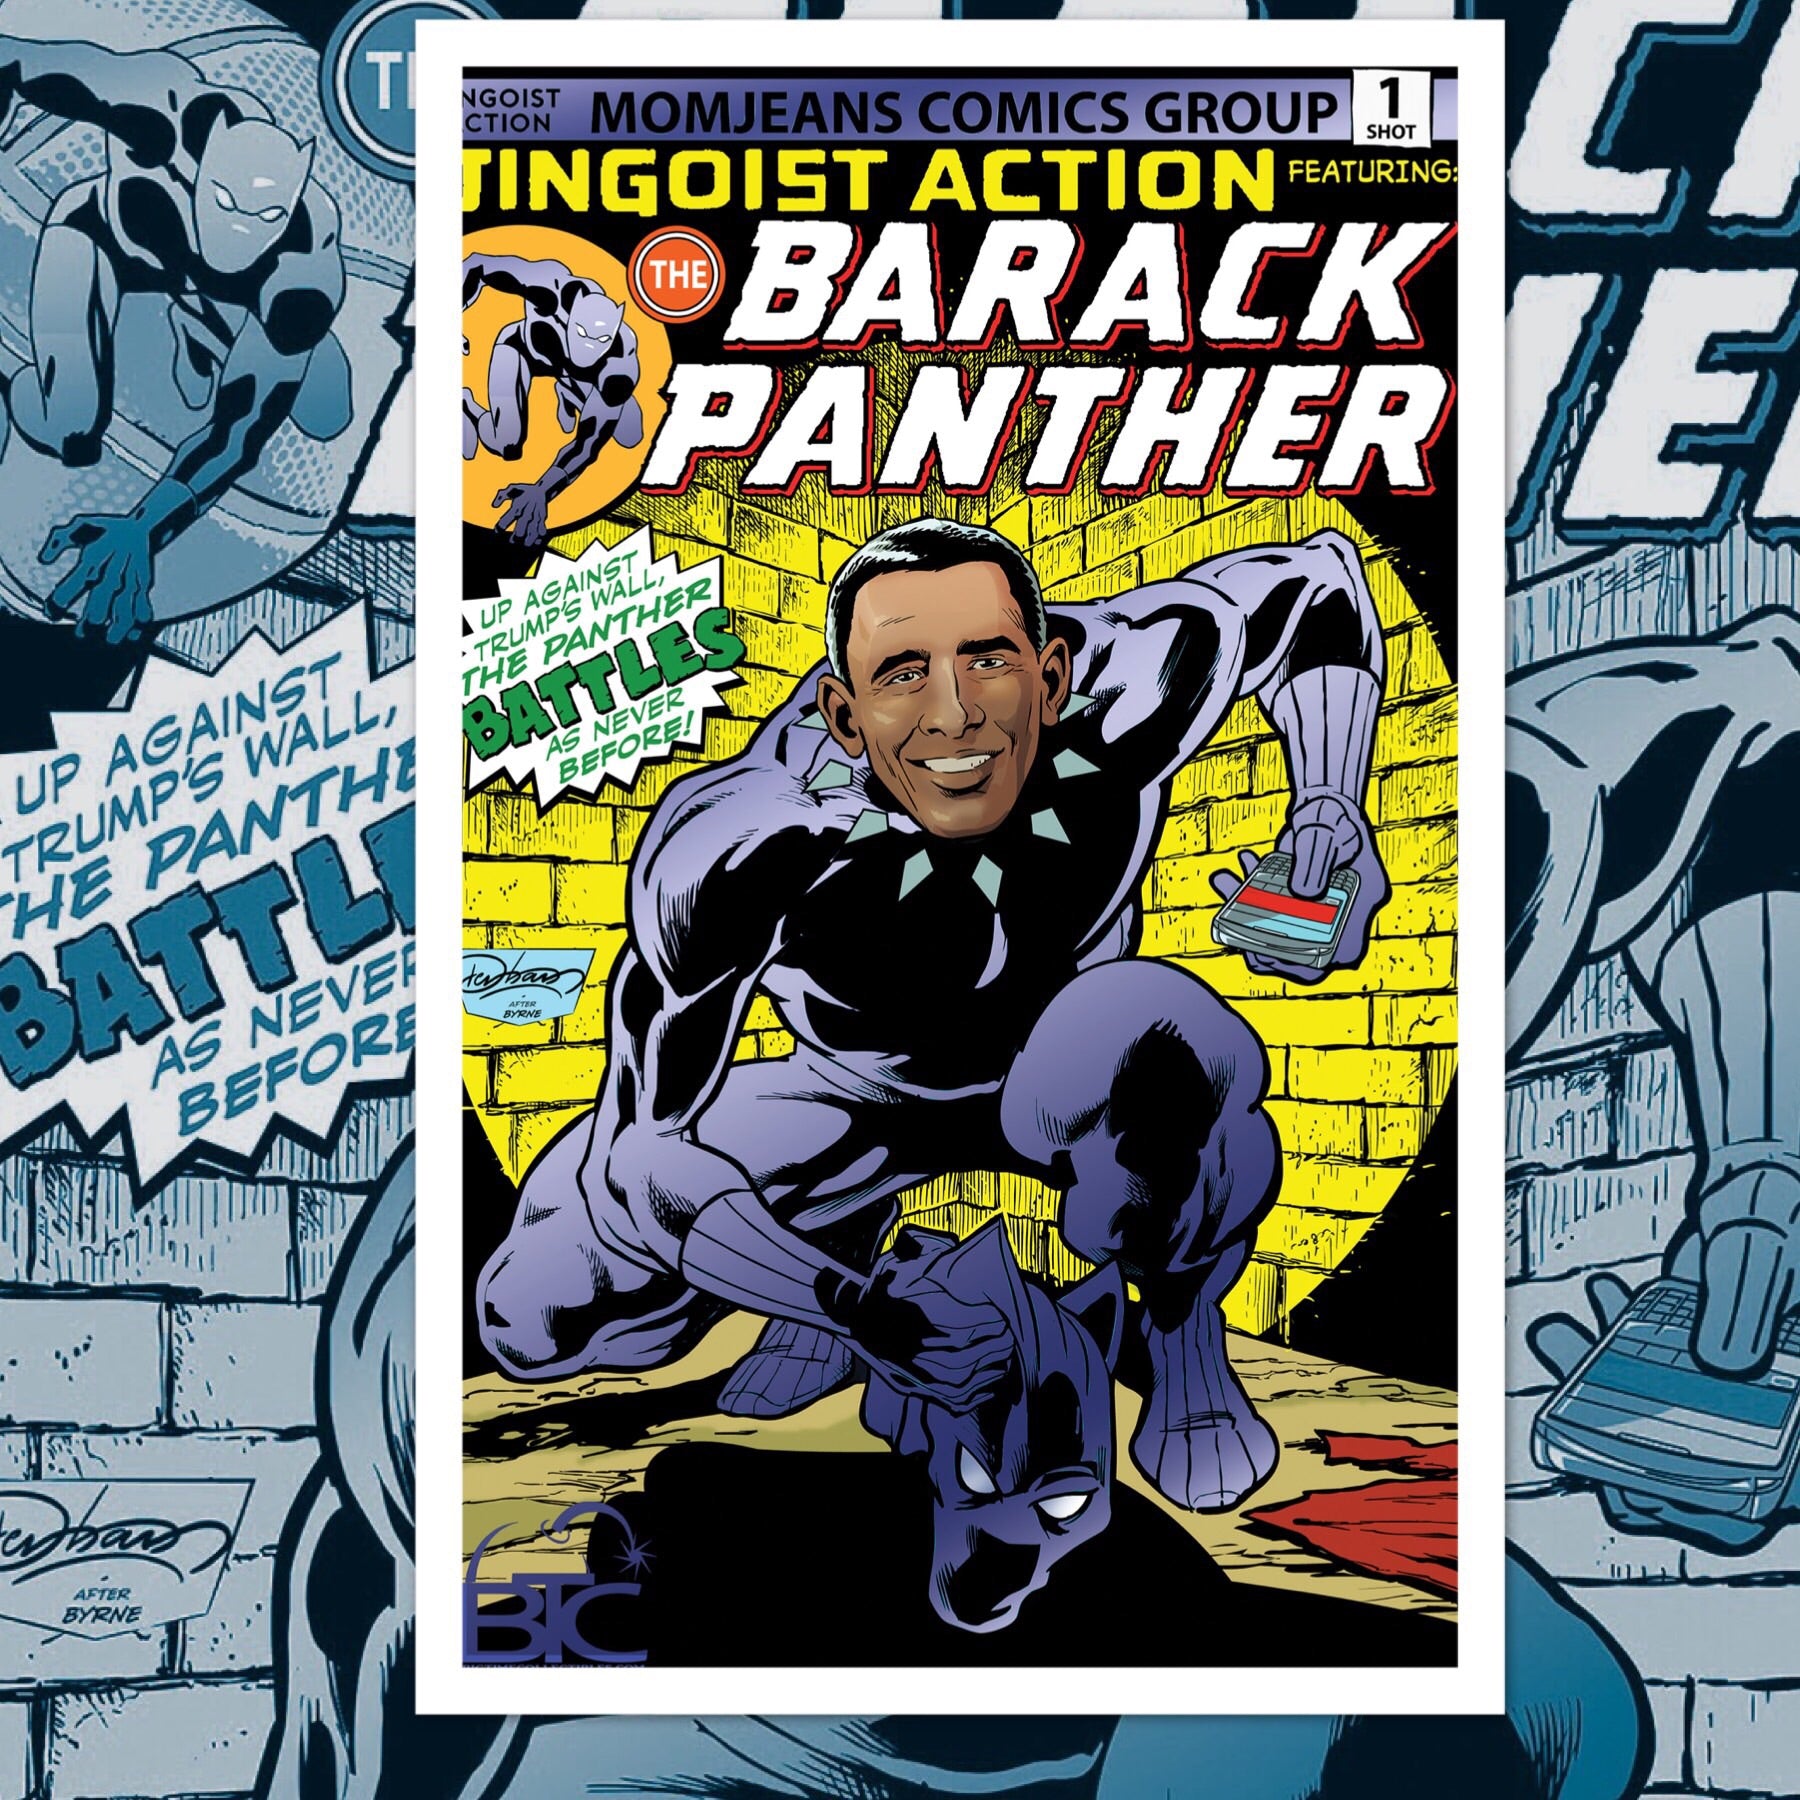 BARACK PANTHER #1 BTC FOIL EXCLUSIVE LIMITED TO ONLY 300 COPIES